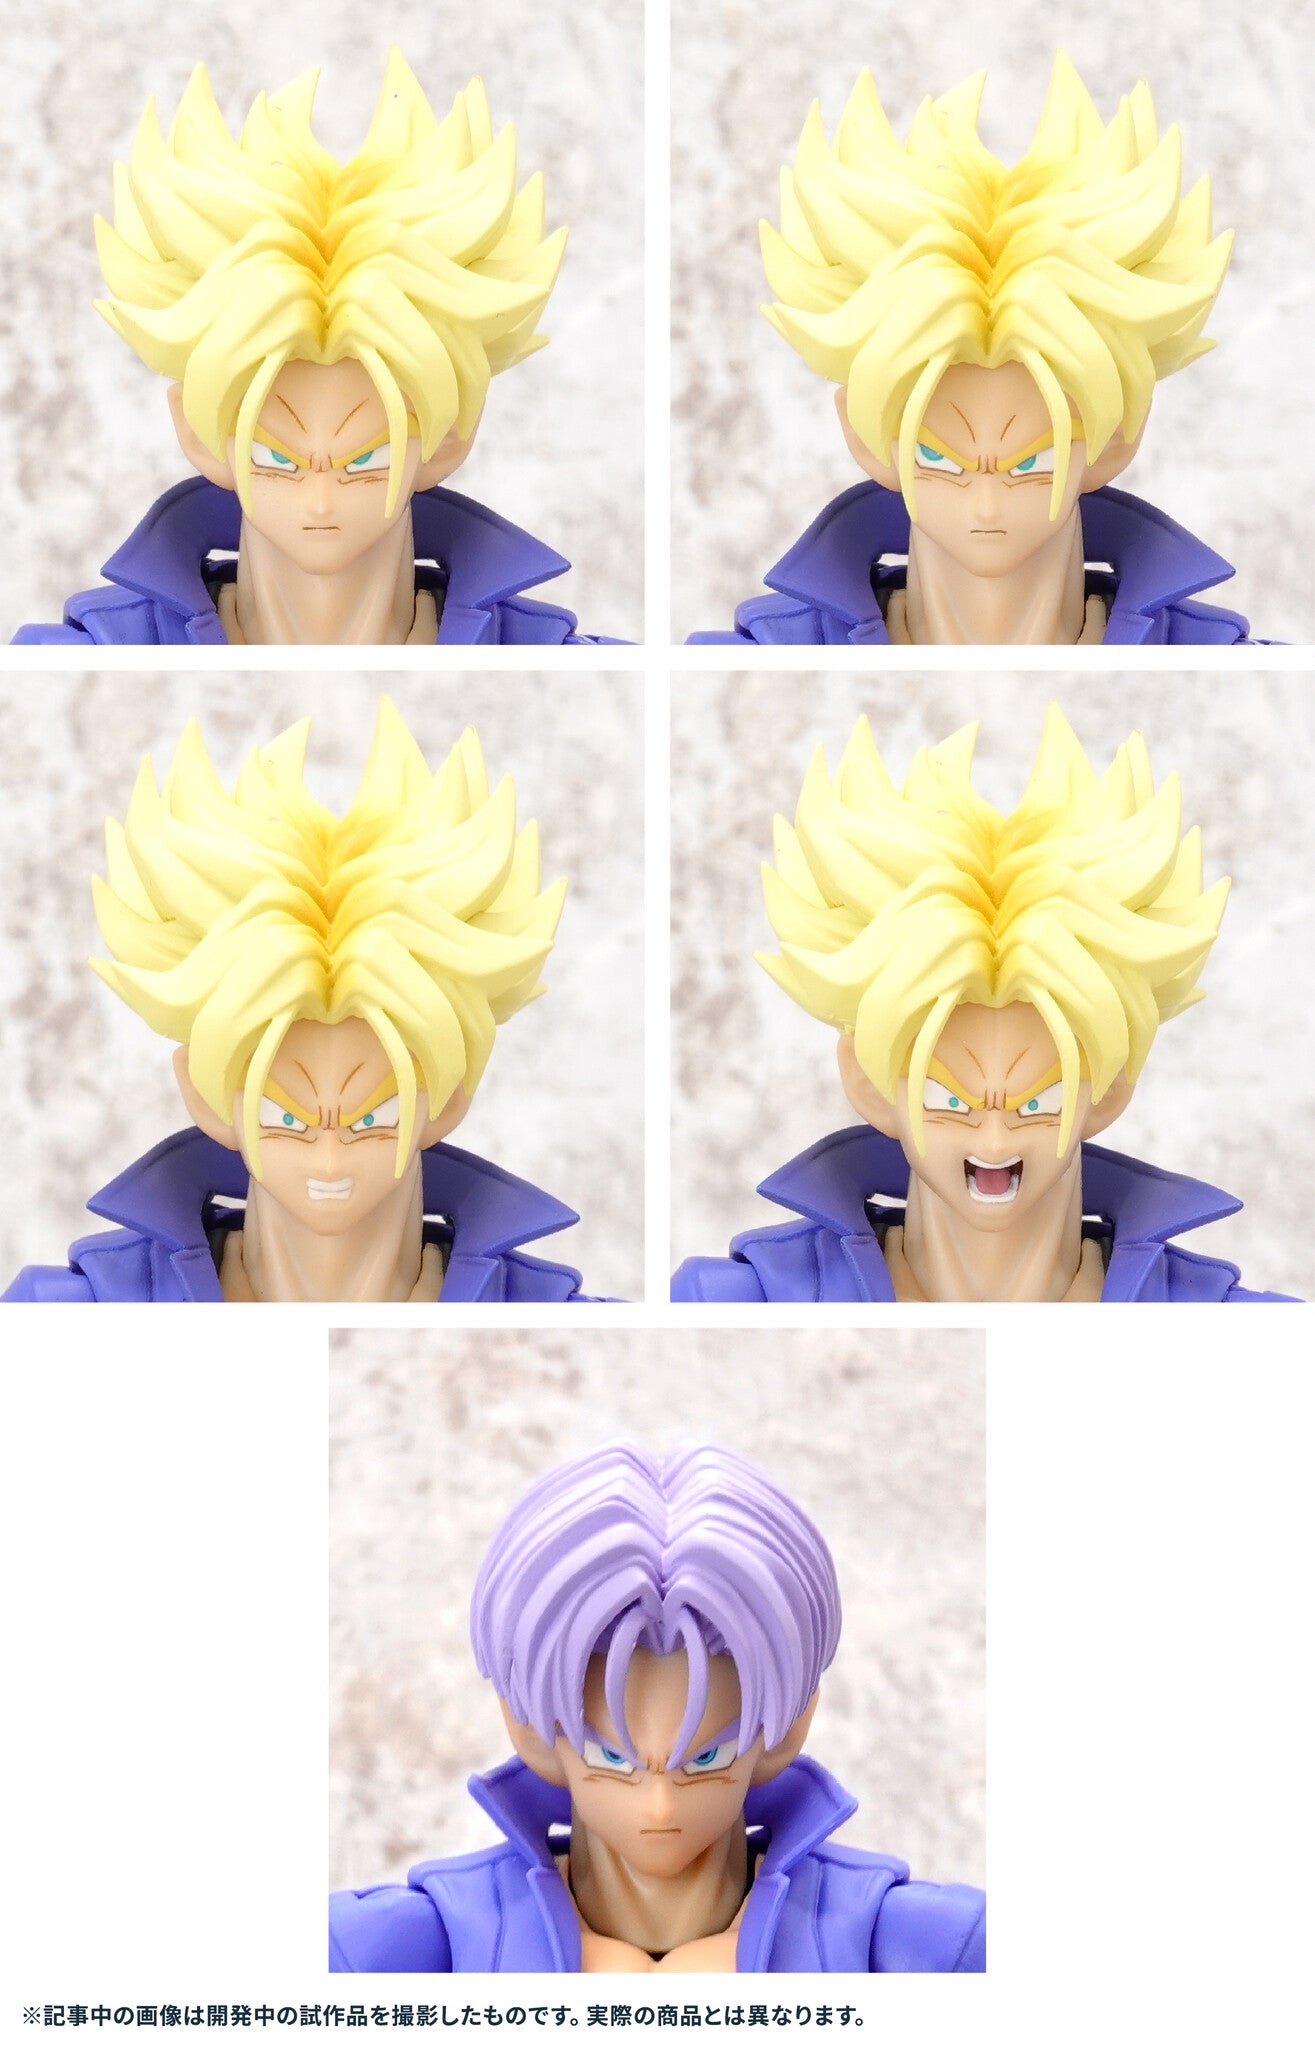 S.H.Figuarts SUPER SAIYAN TRUNKS - The Boy from the Future